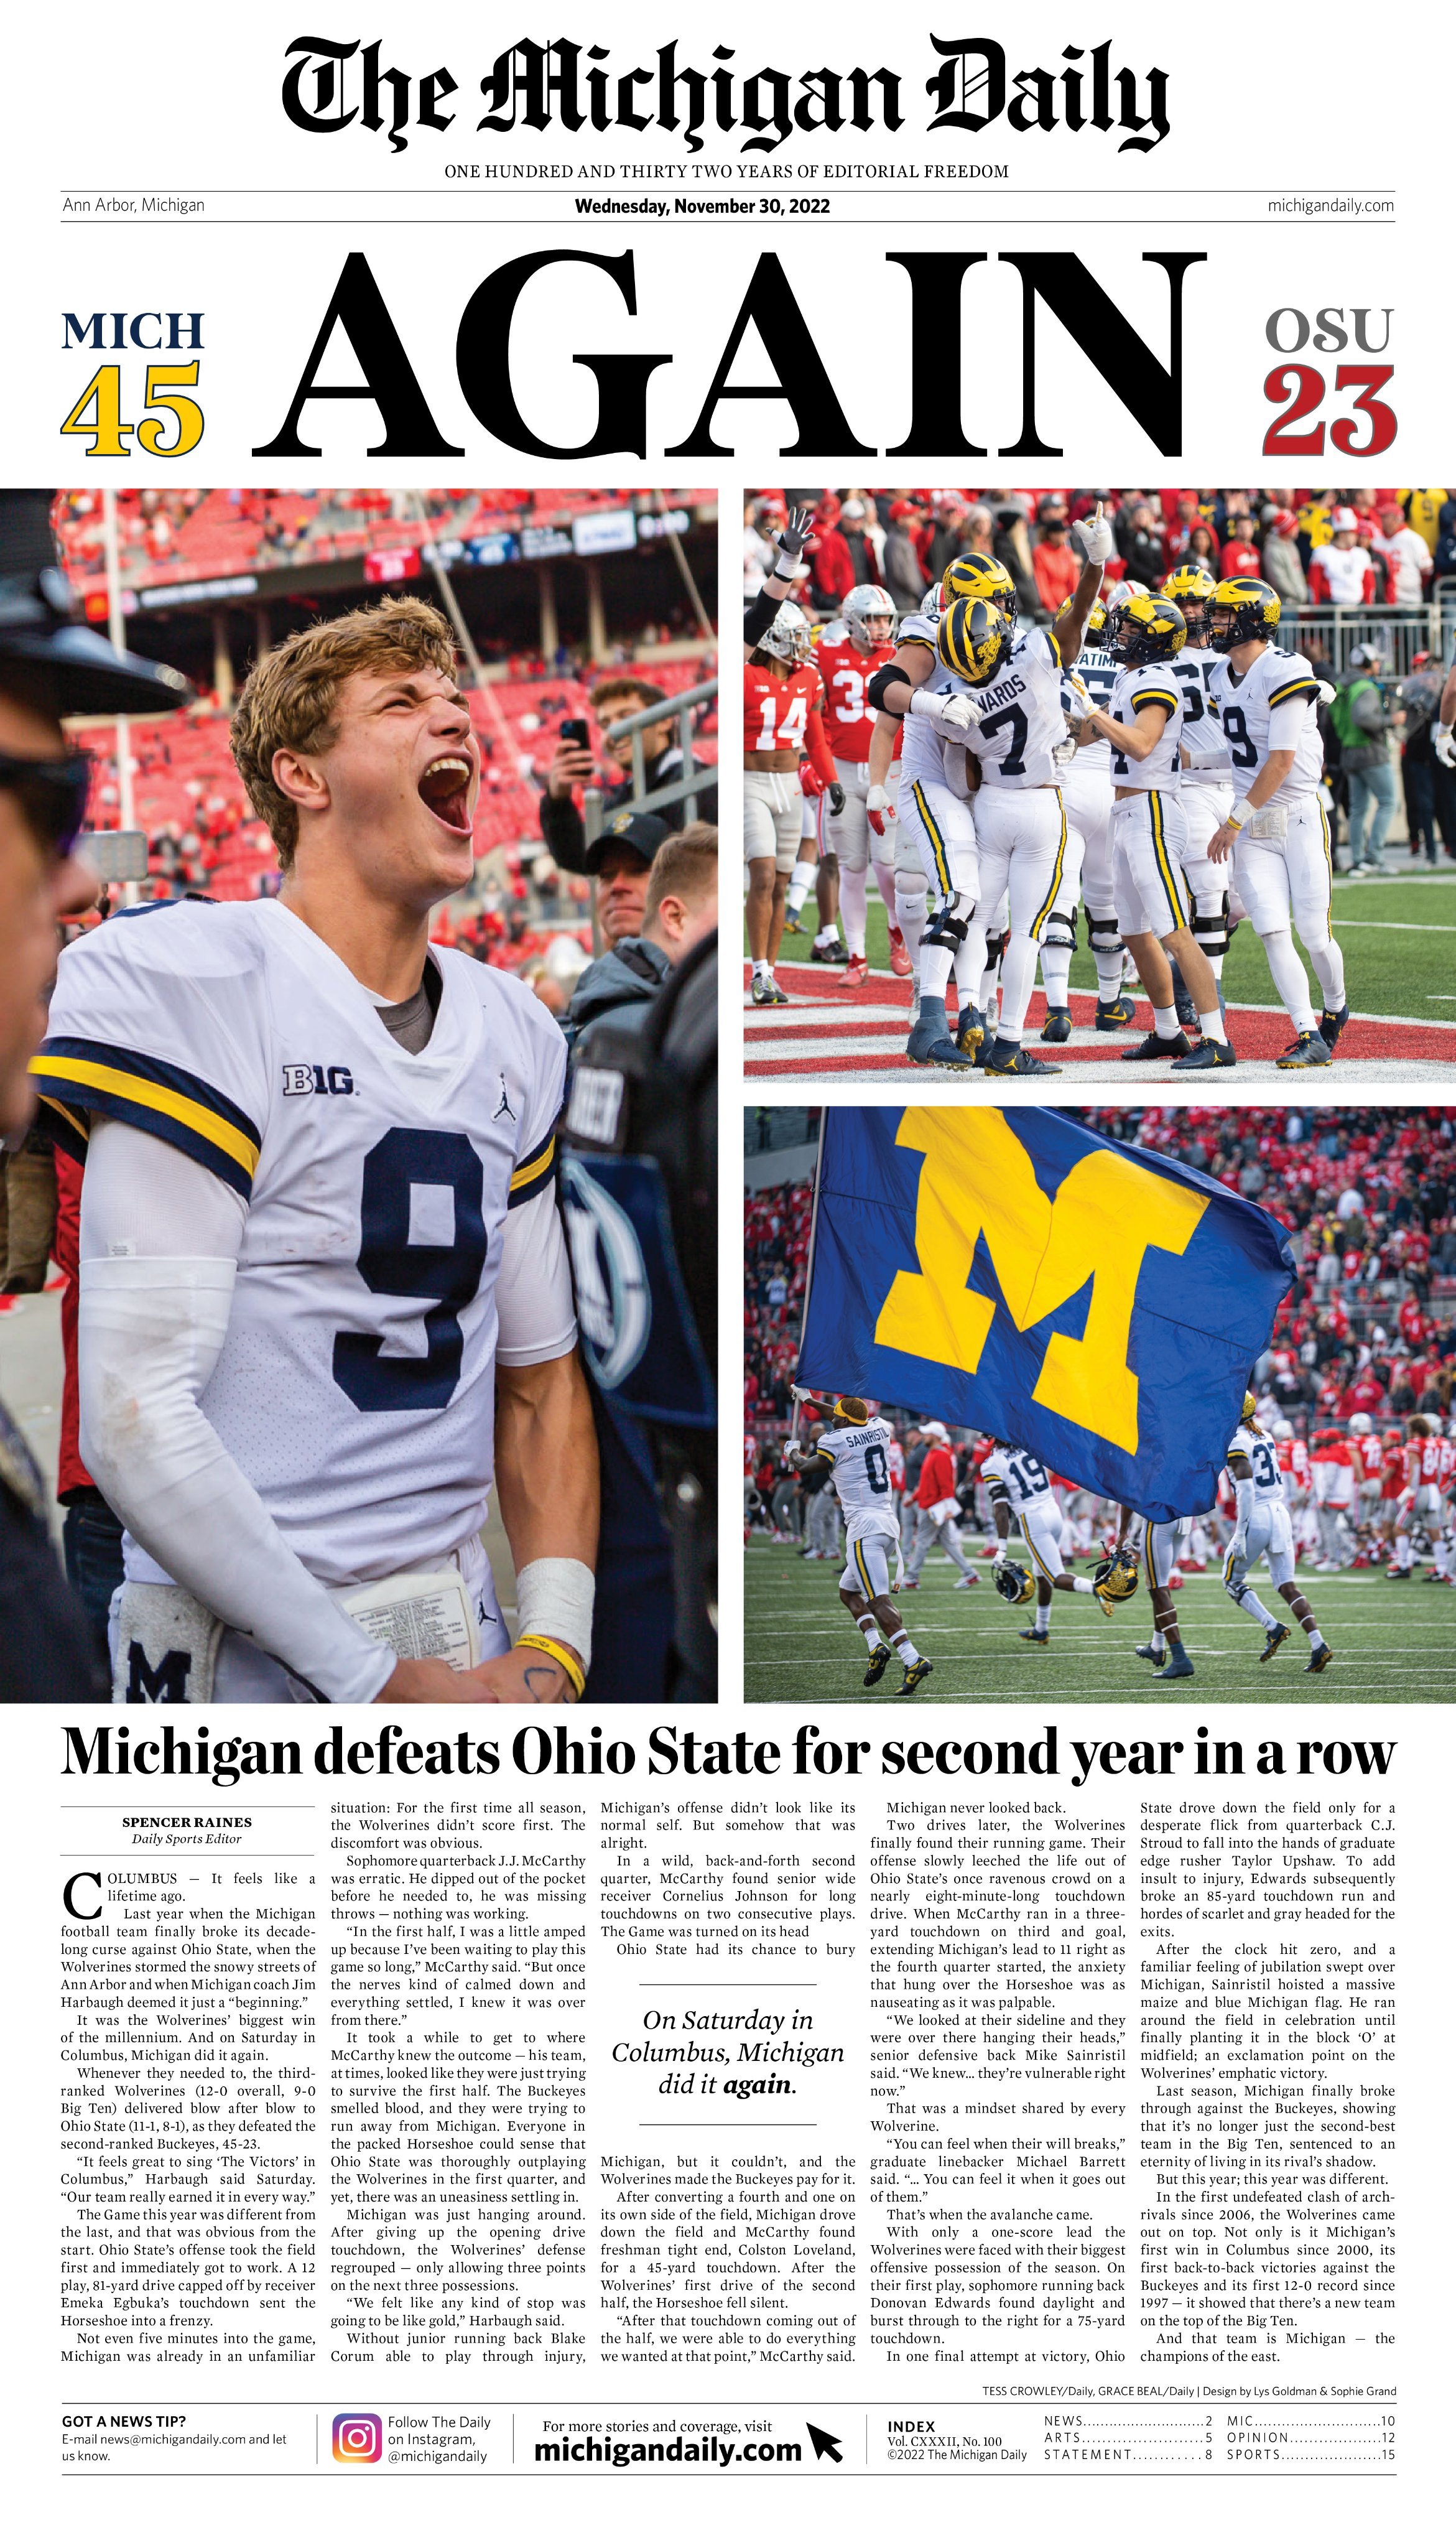 MDAILY OSU 11:30 front cover.jpeg